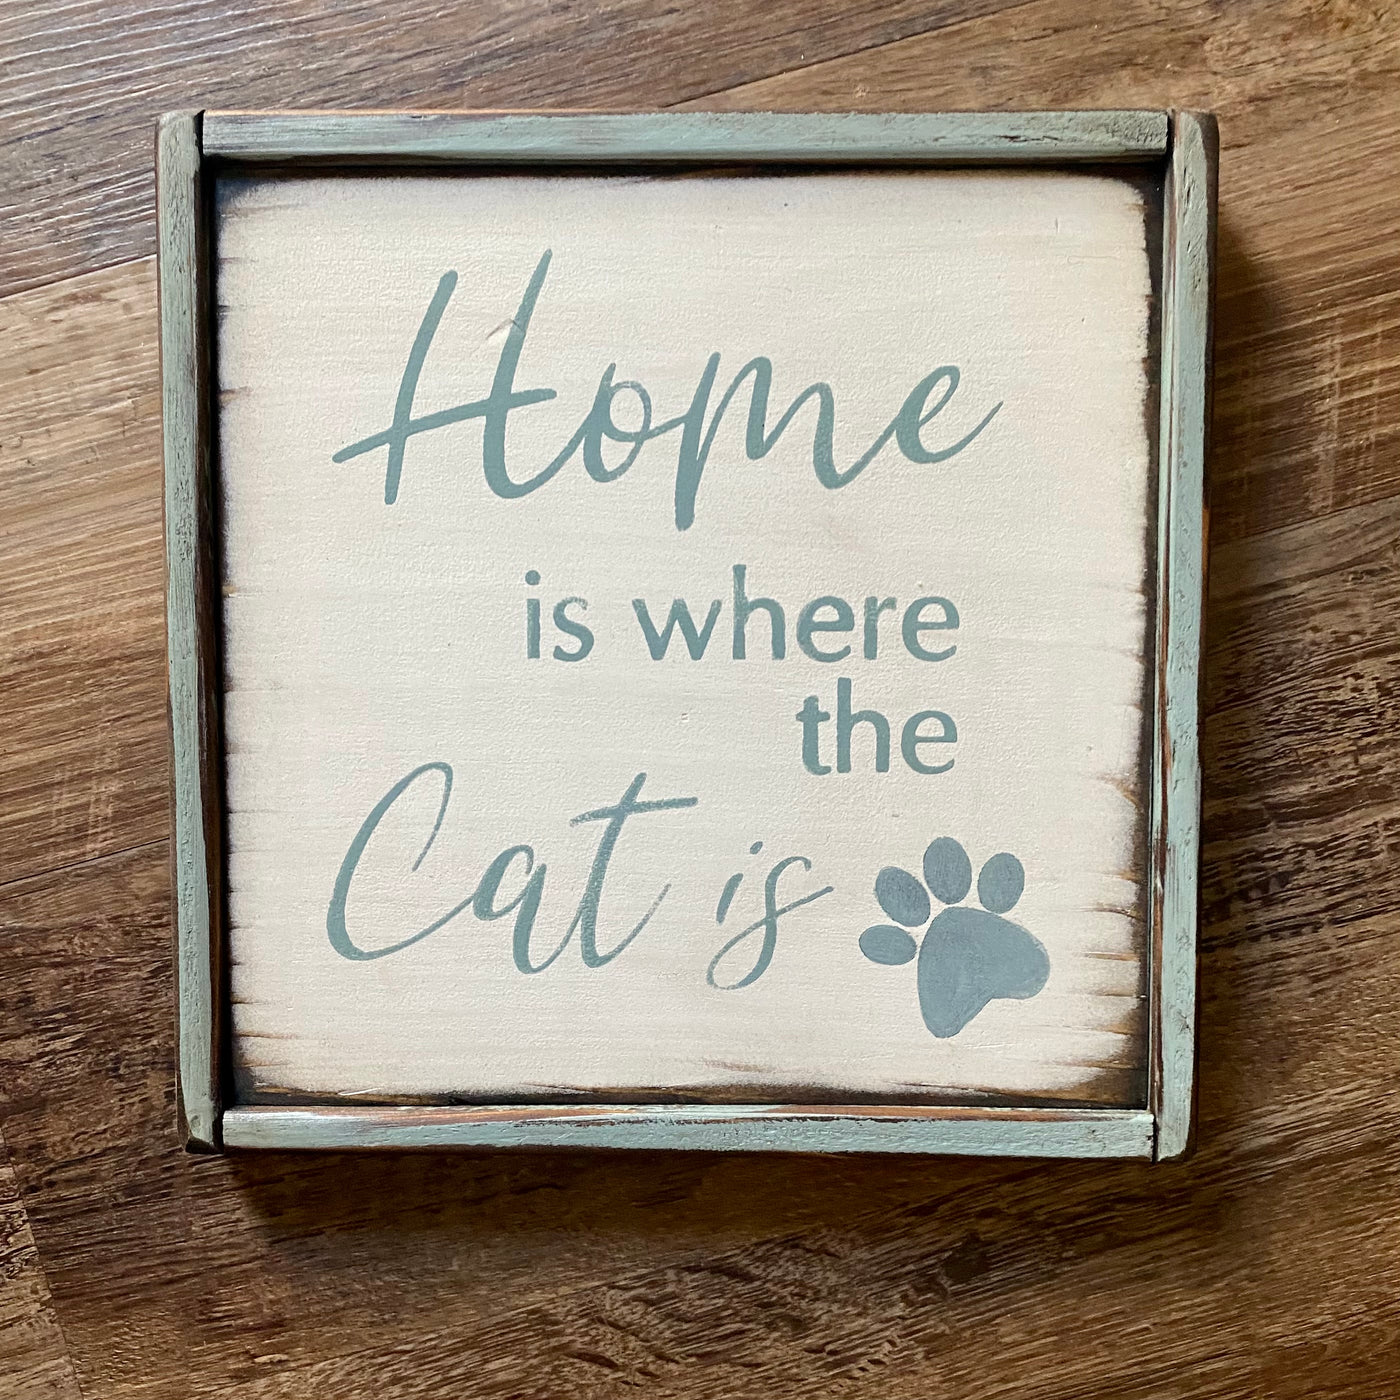 10x10 light blue framed wood sign reads home is where the cat is. White background light blue lettering.